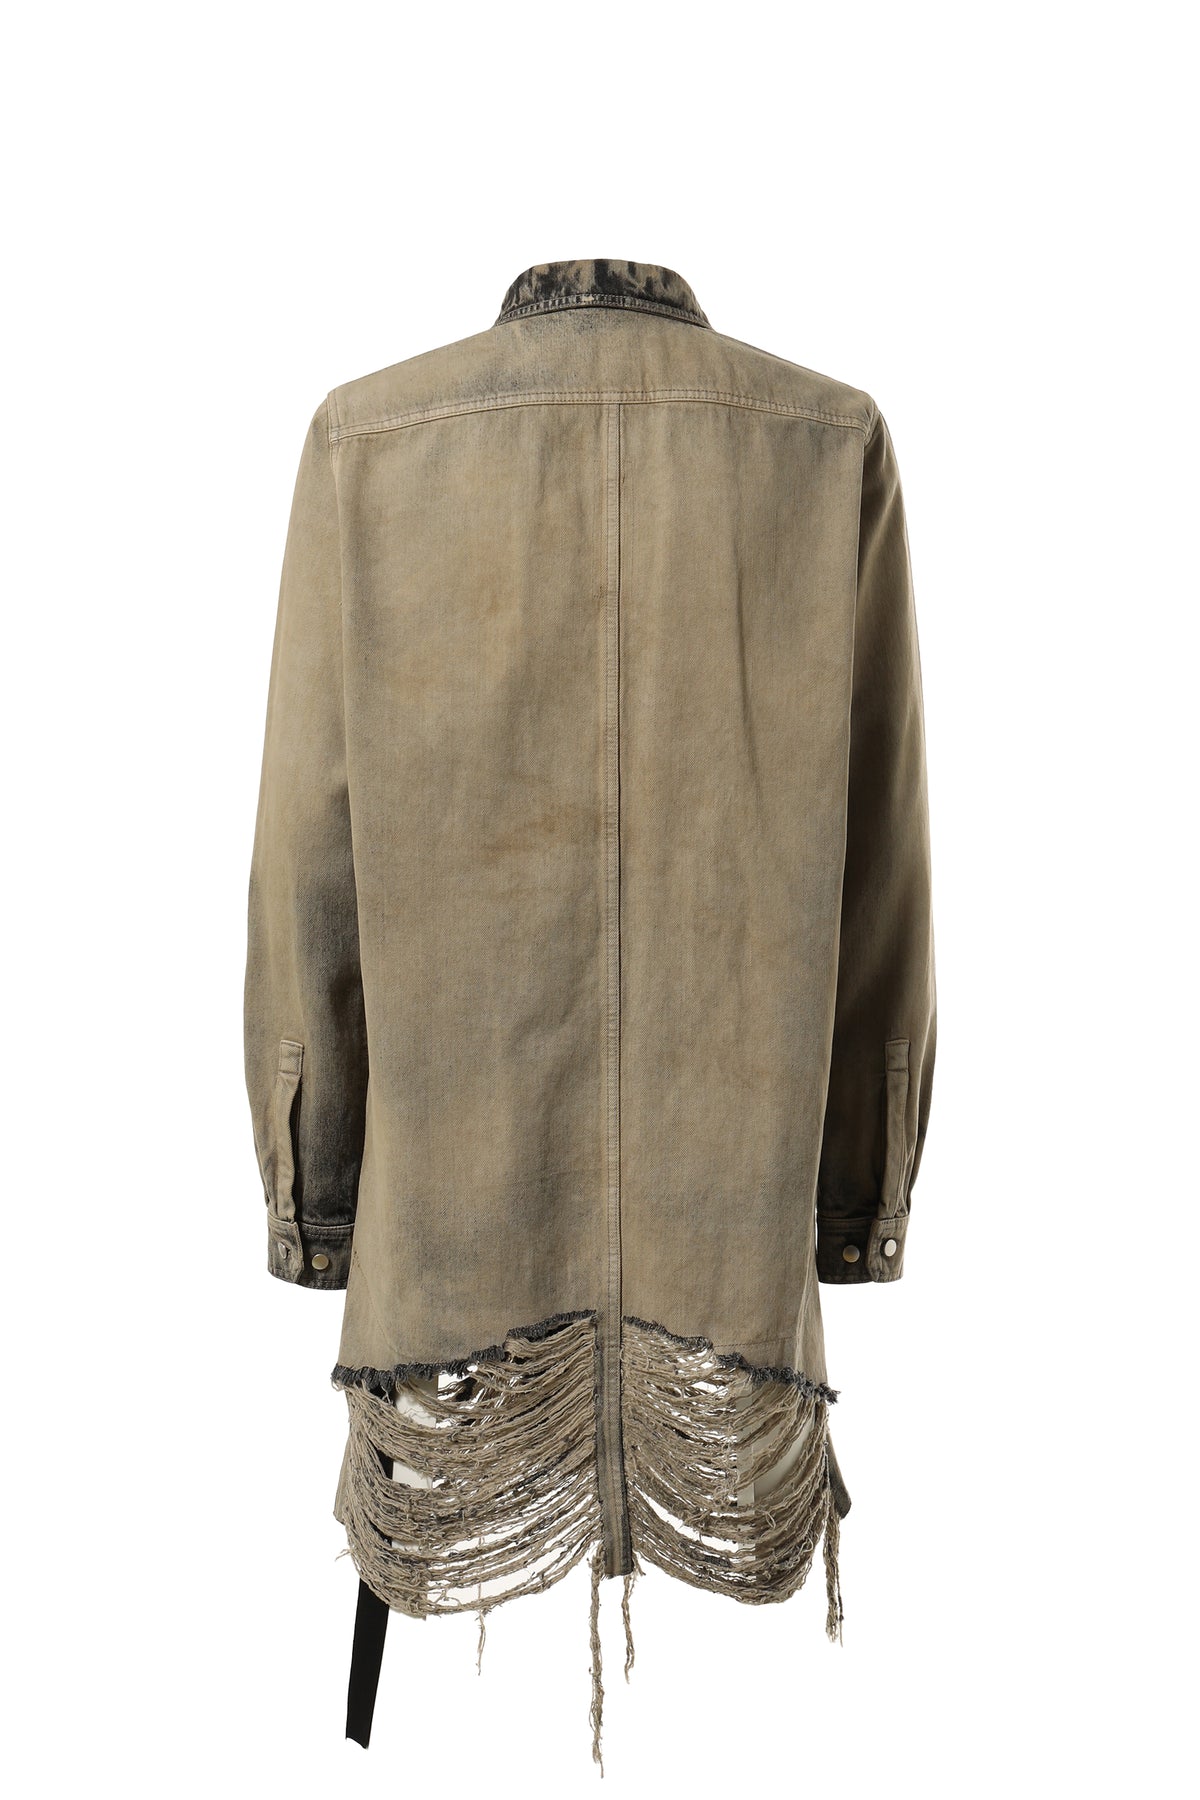 Rick Owens OUTERSHIRT / MINERAL FRINGED